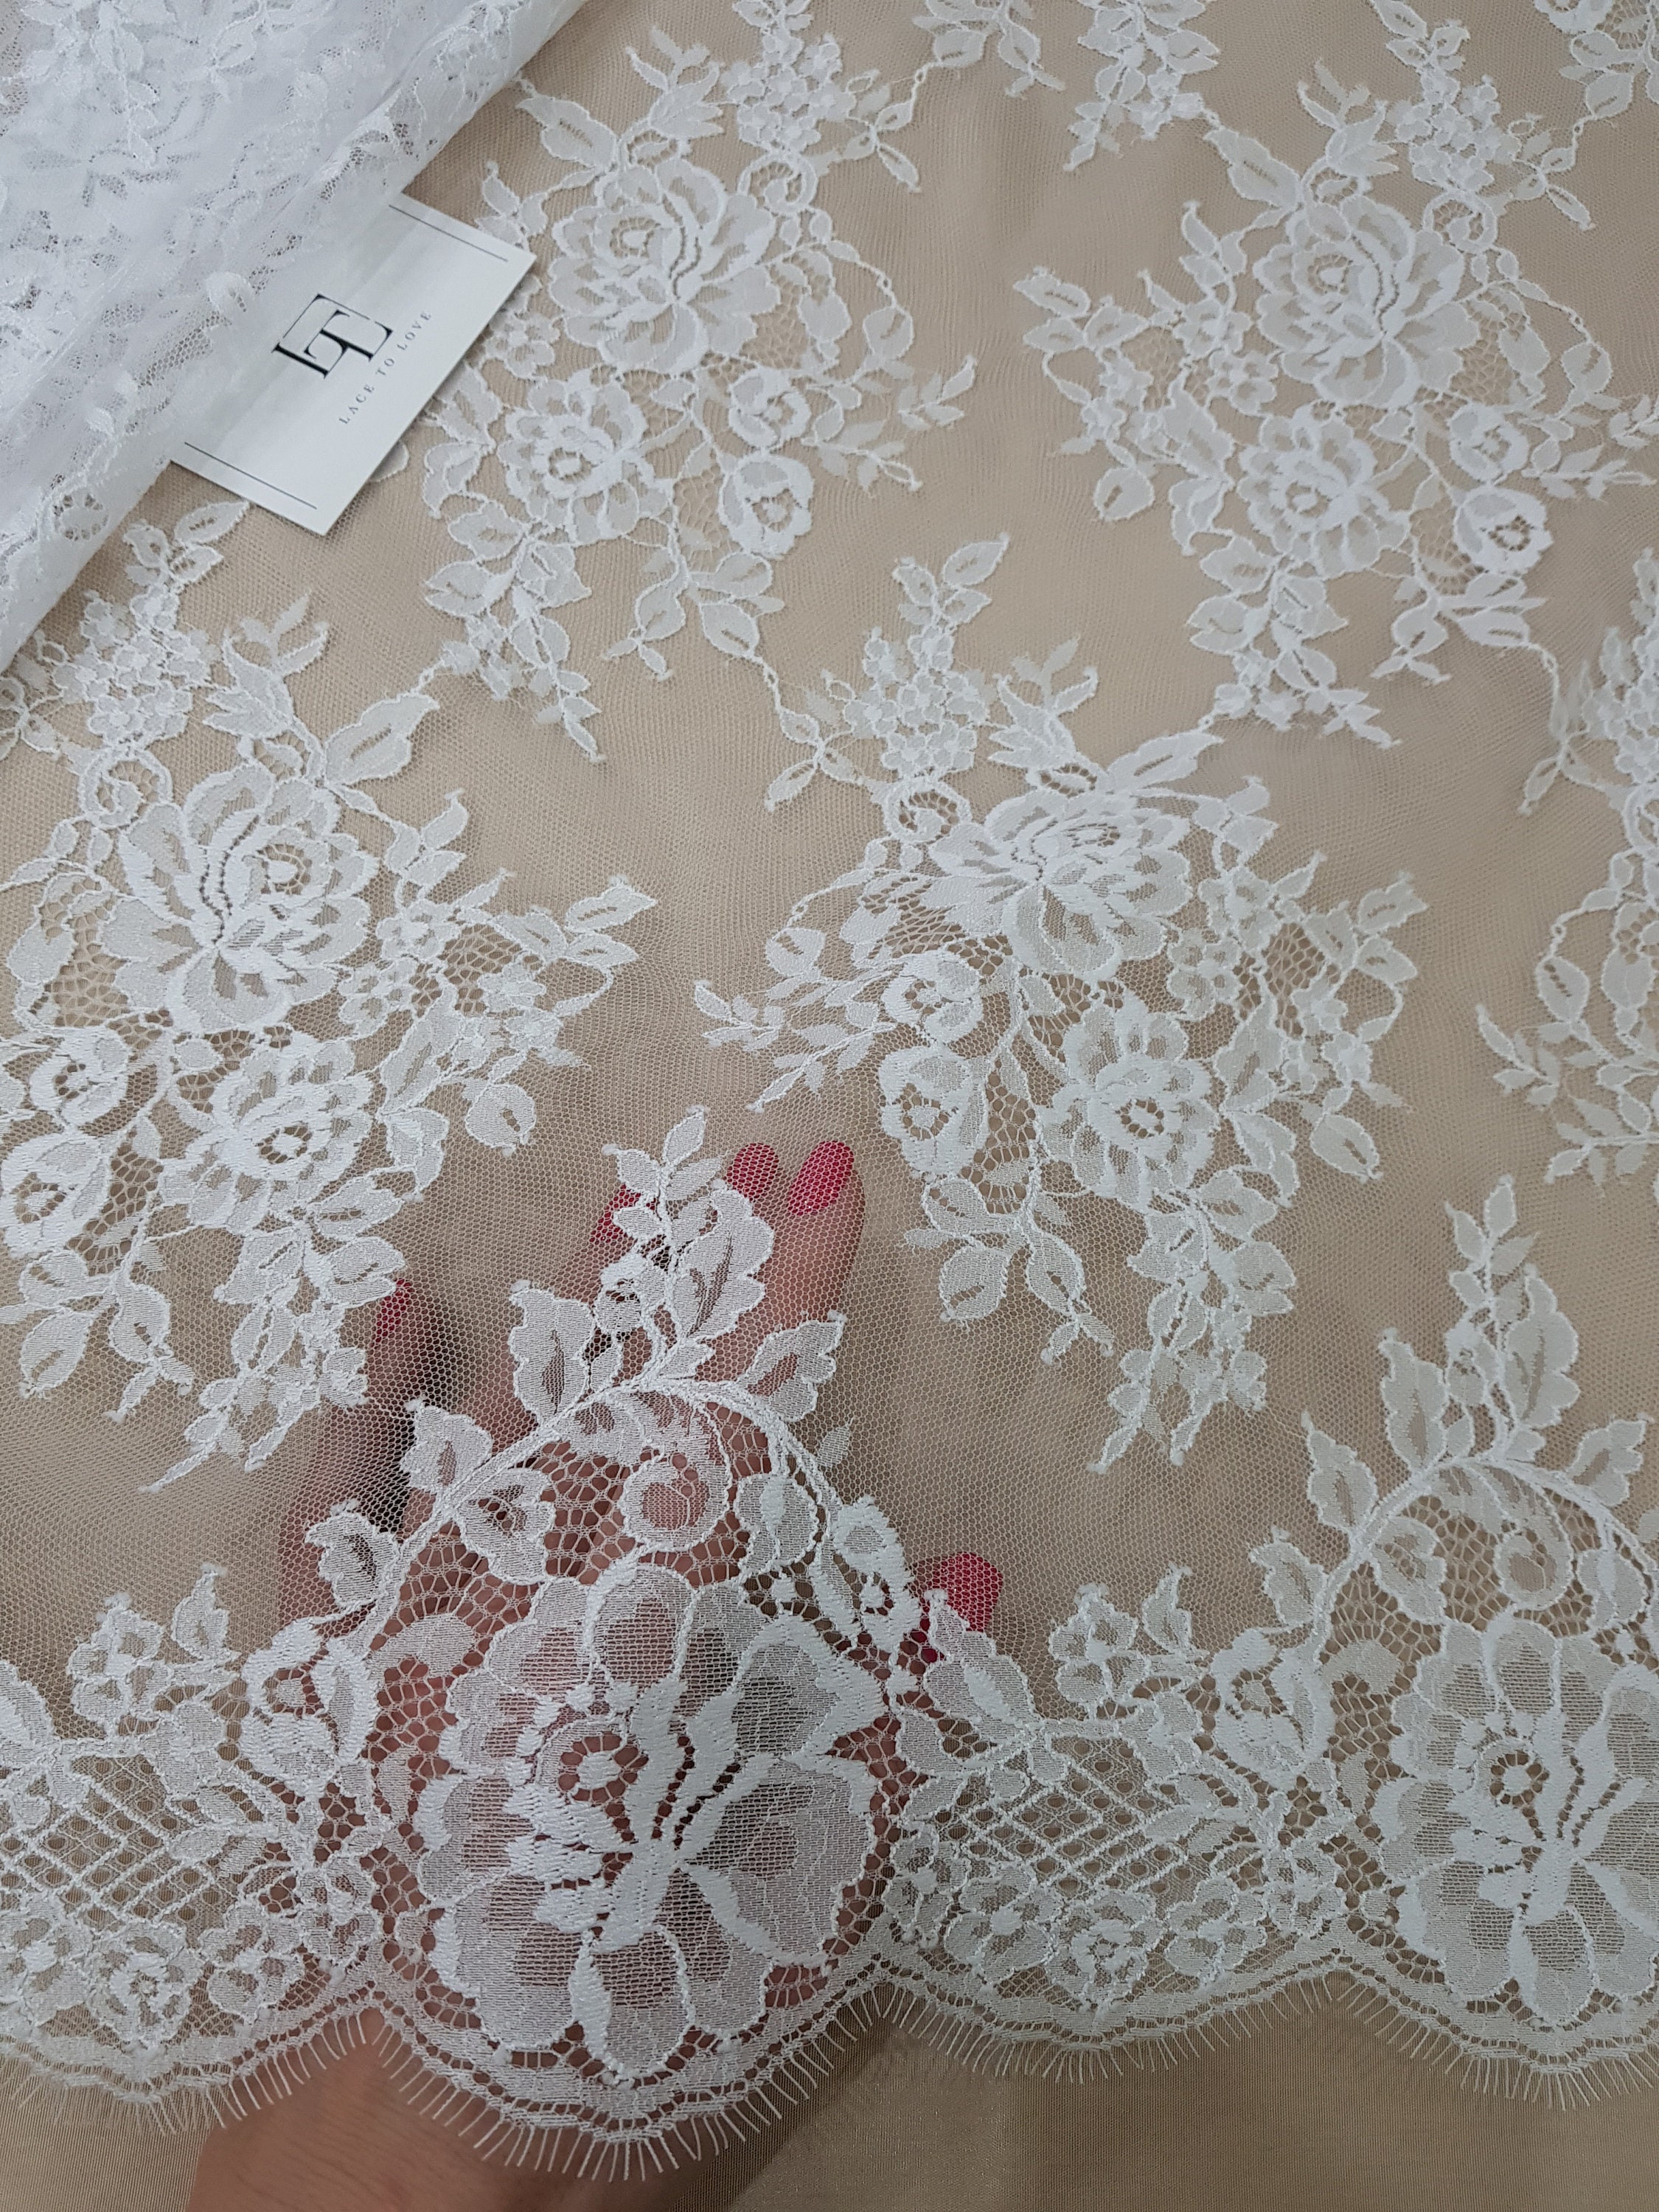 Pure White Lace Fabric, French Lace, Chantilly Lace, Wedding Lace, Bridal  Lace, Evening Dress Lace, Lingerie Lace Fabric by the Yard L91026 -   Israel